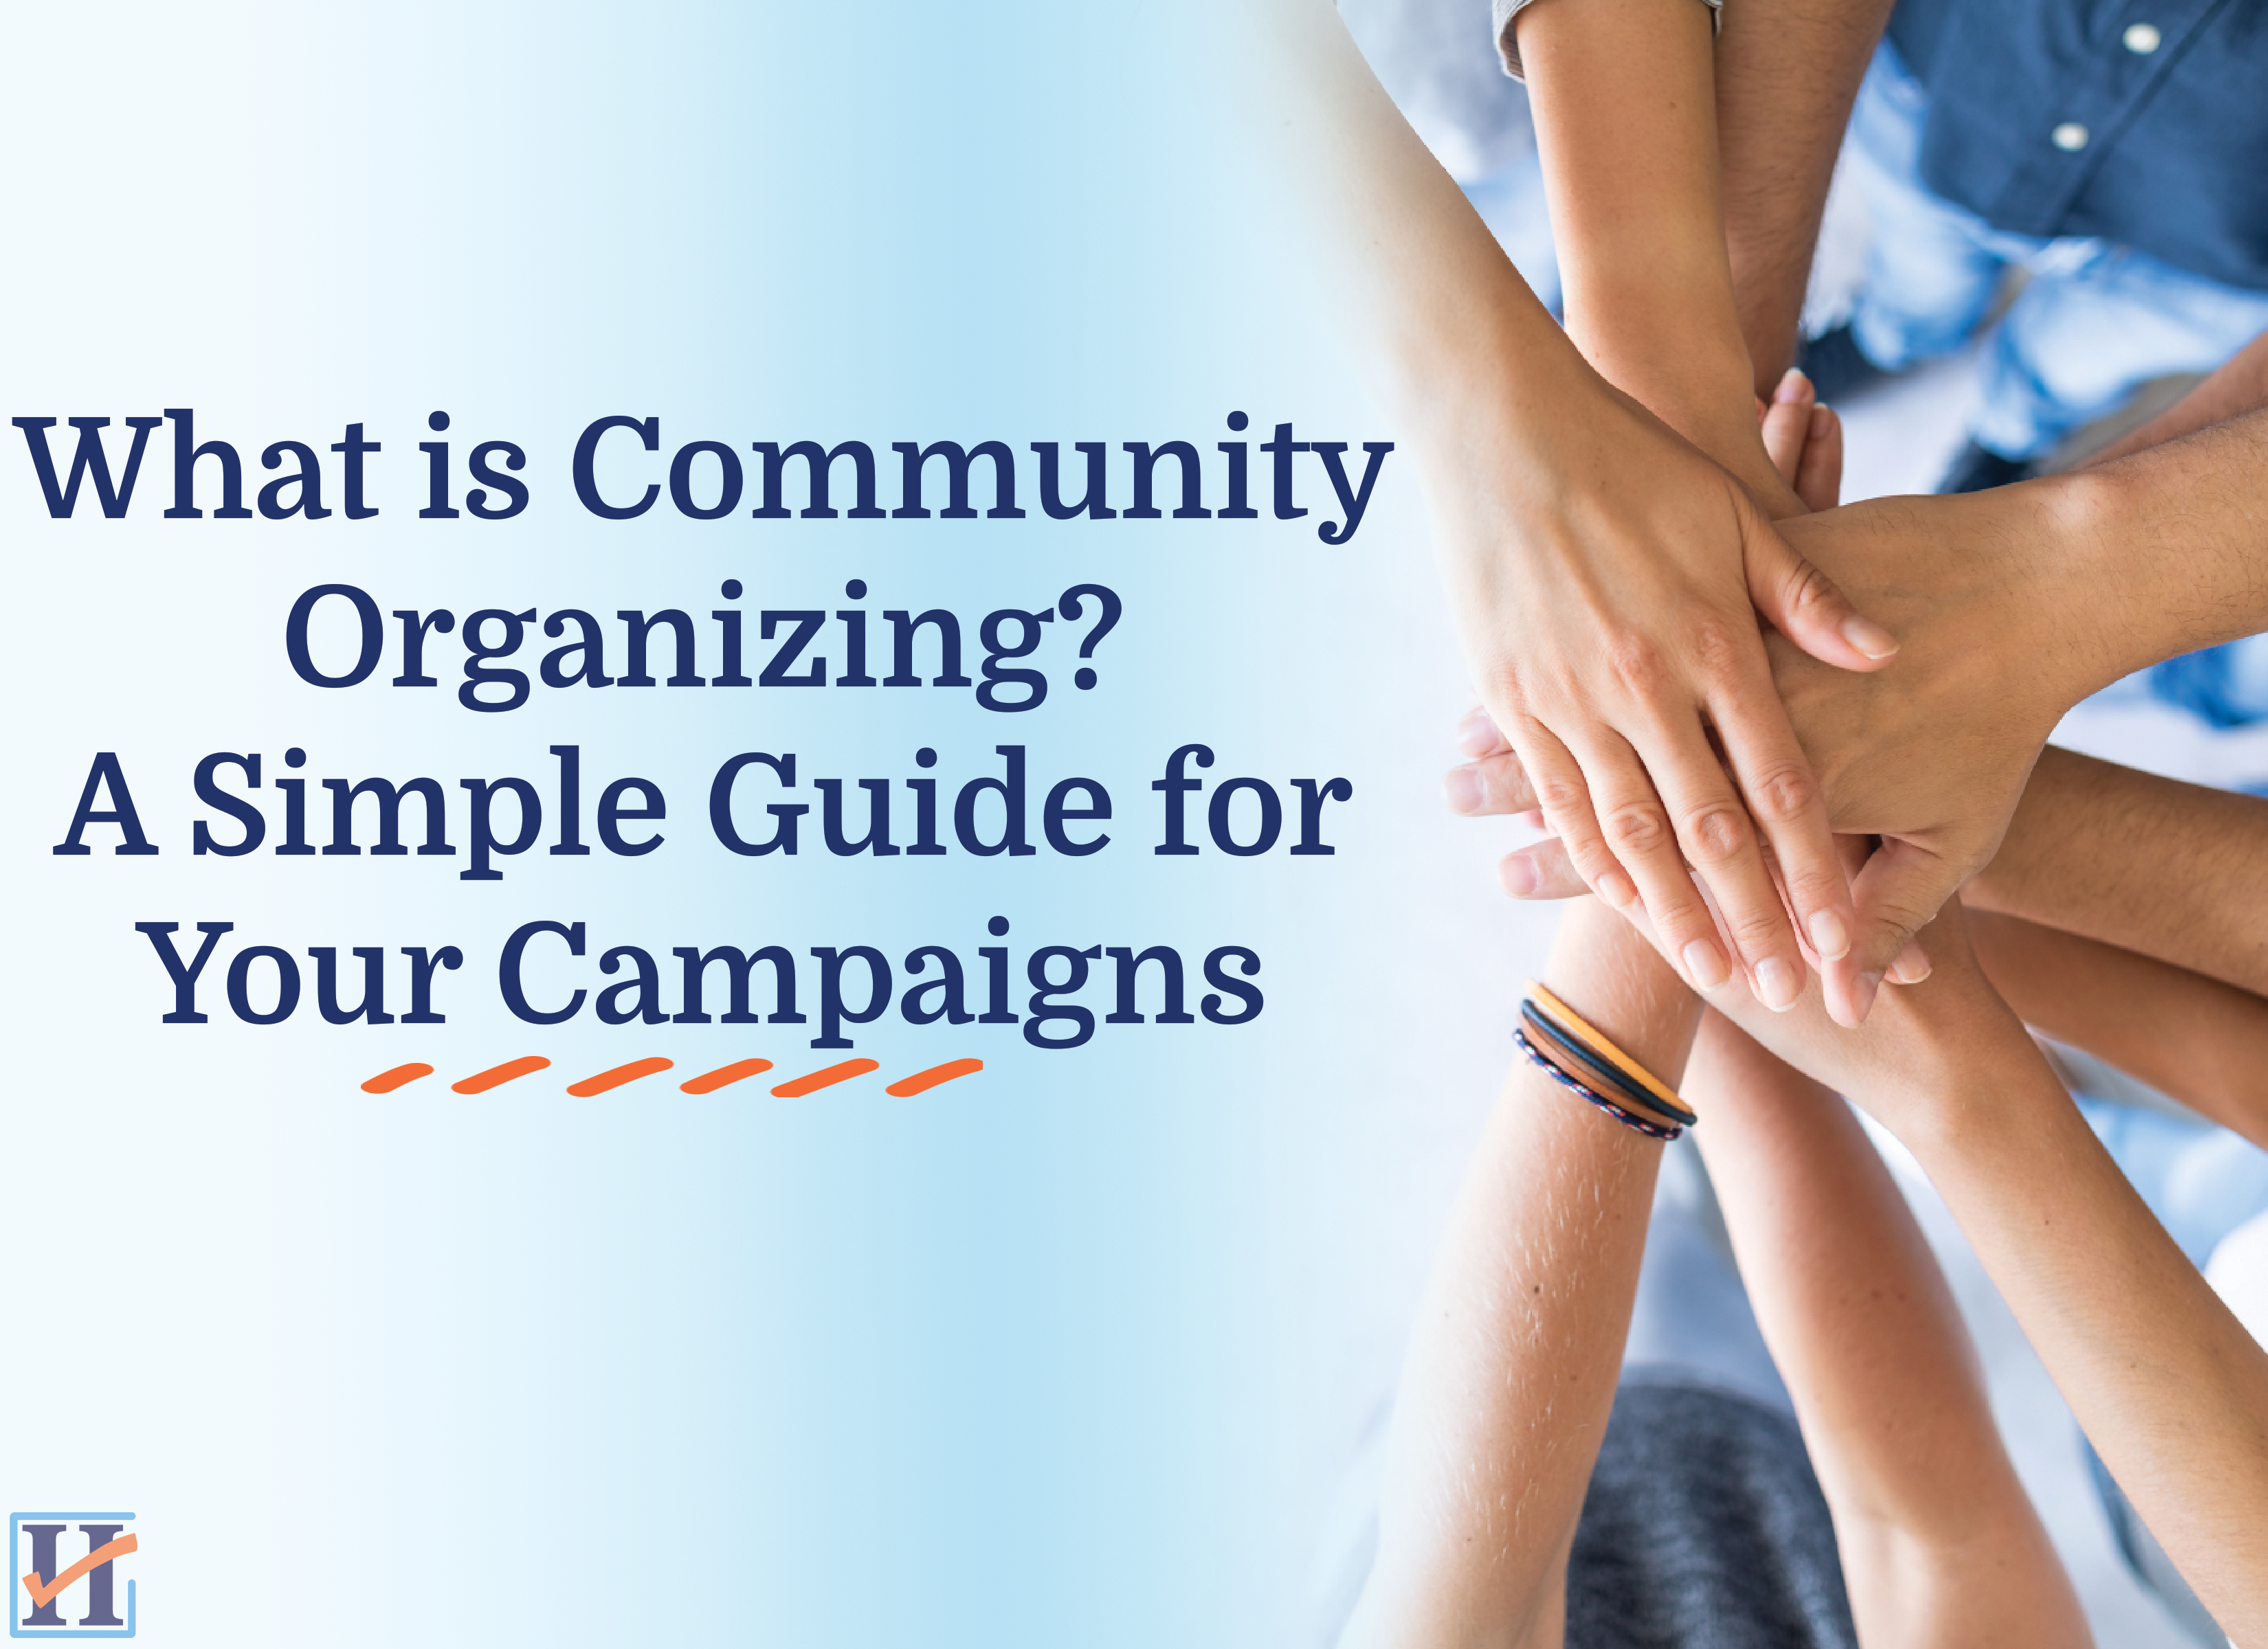 What is community organizing and how does it work for campaigns?